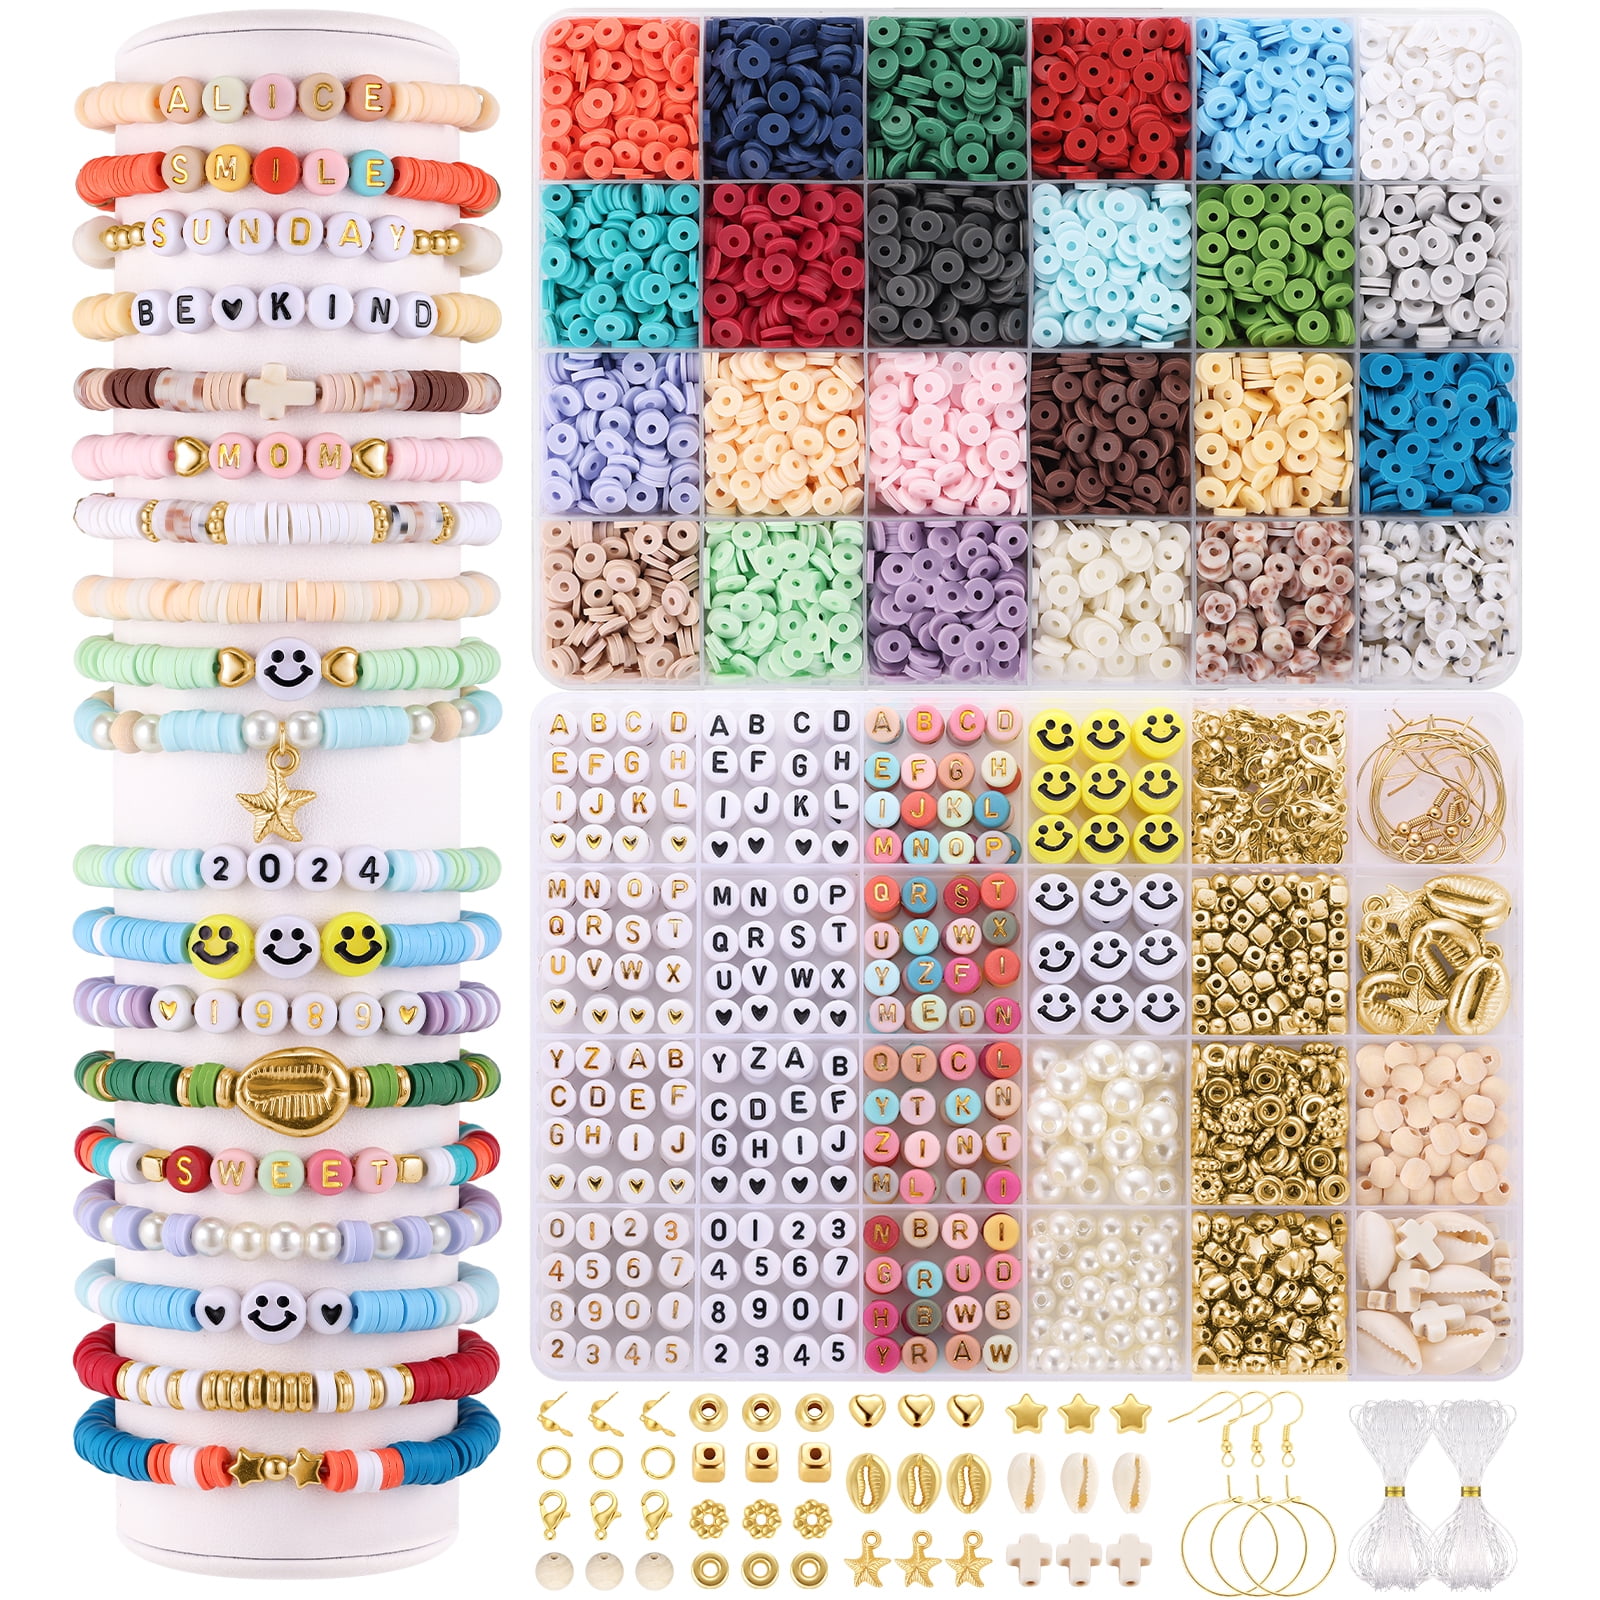 Funtopia Clay Beads, 48 Colors Charm Bracelet Making kit for Girls